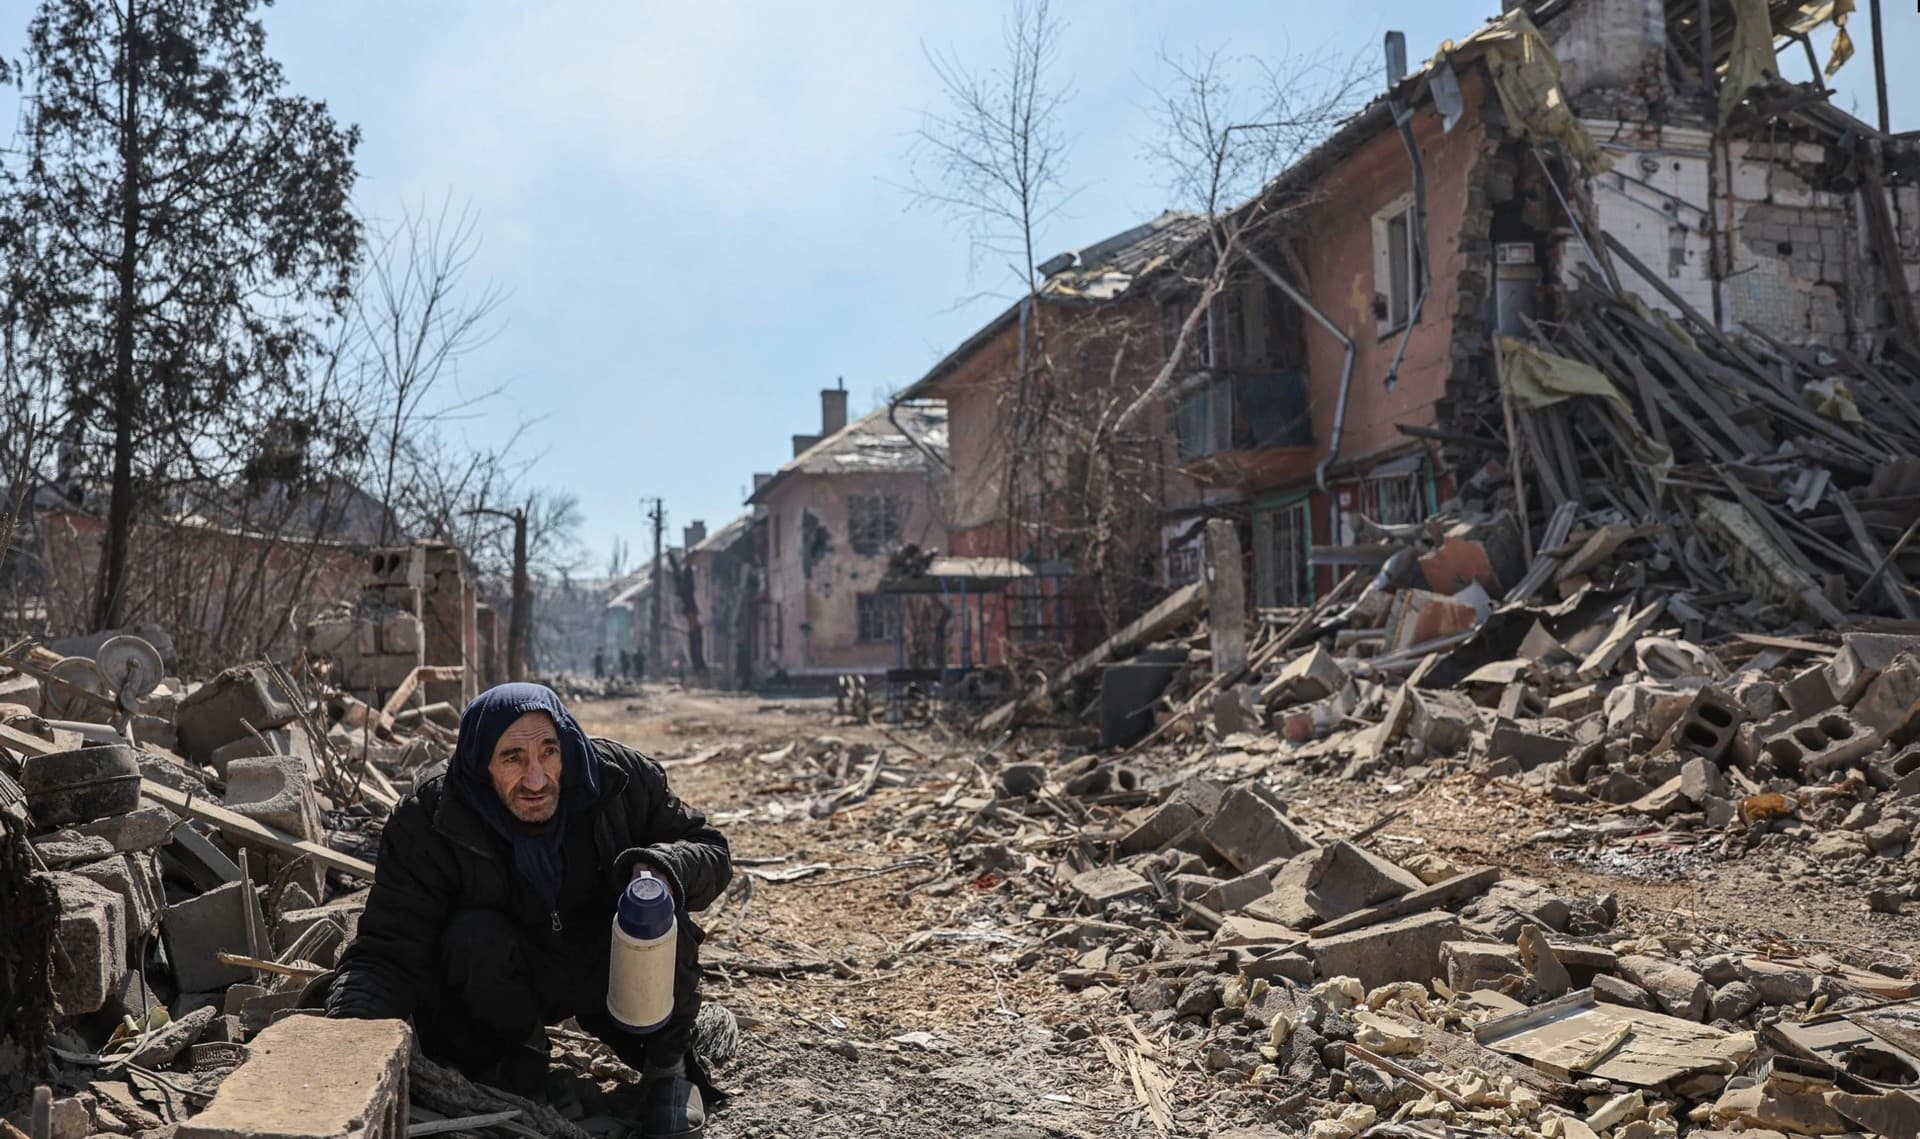 A man crouches amid the rubble in the Livoberezhnyi district of Mariupol